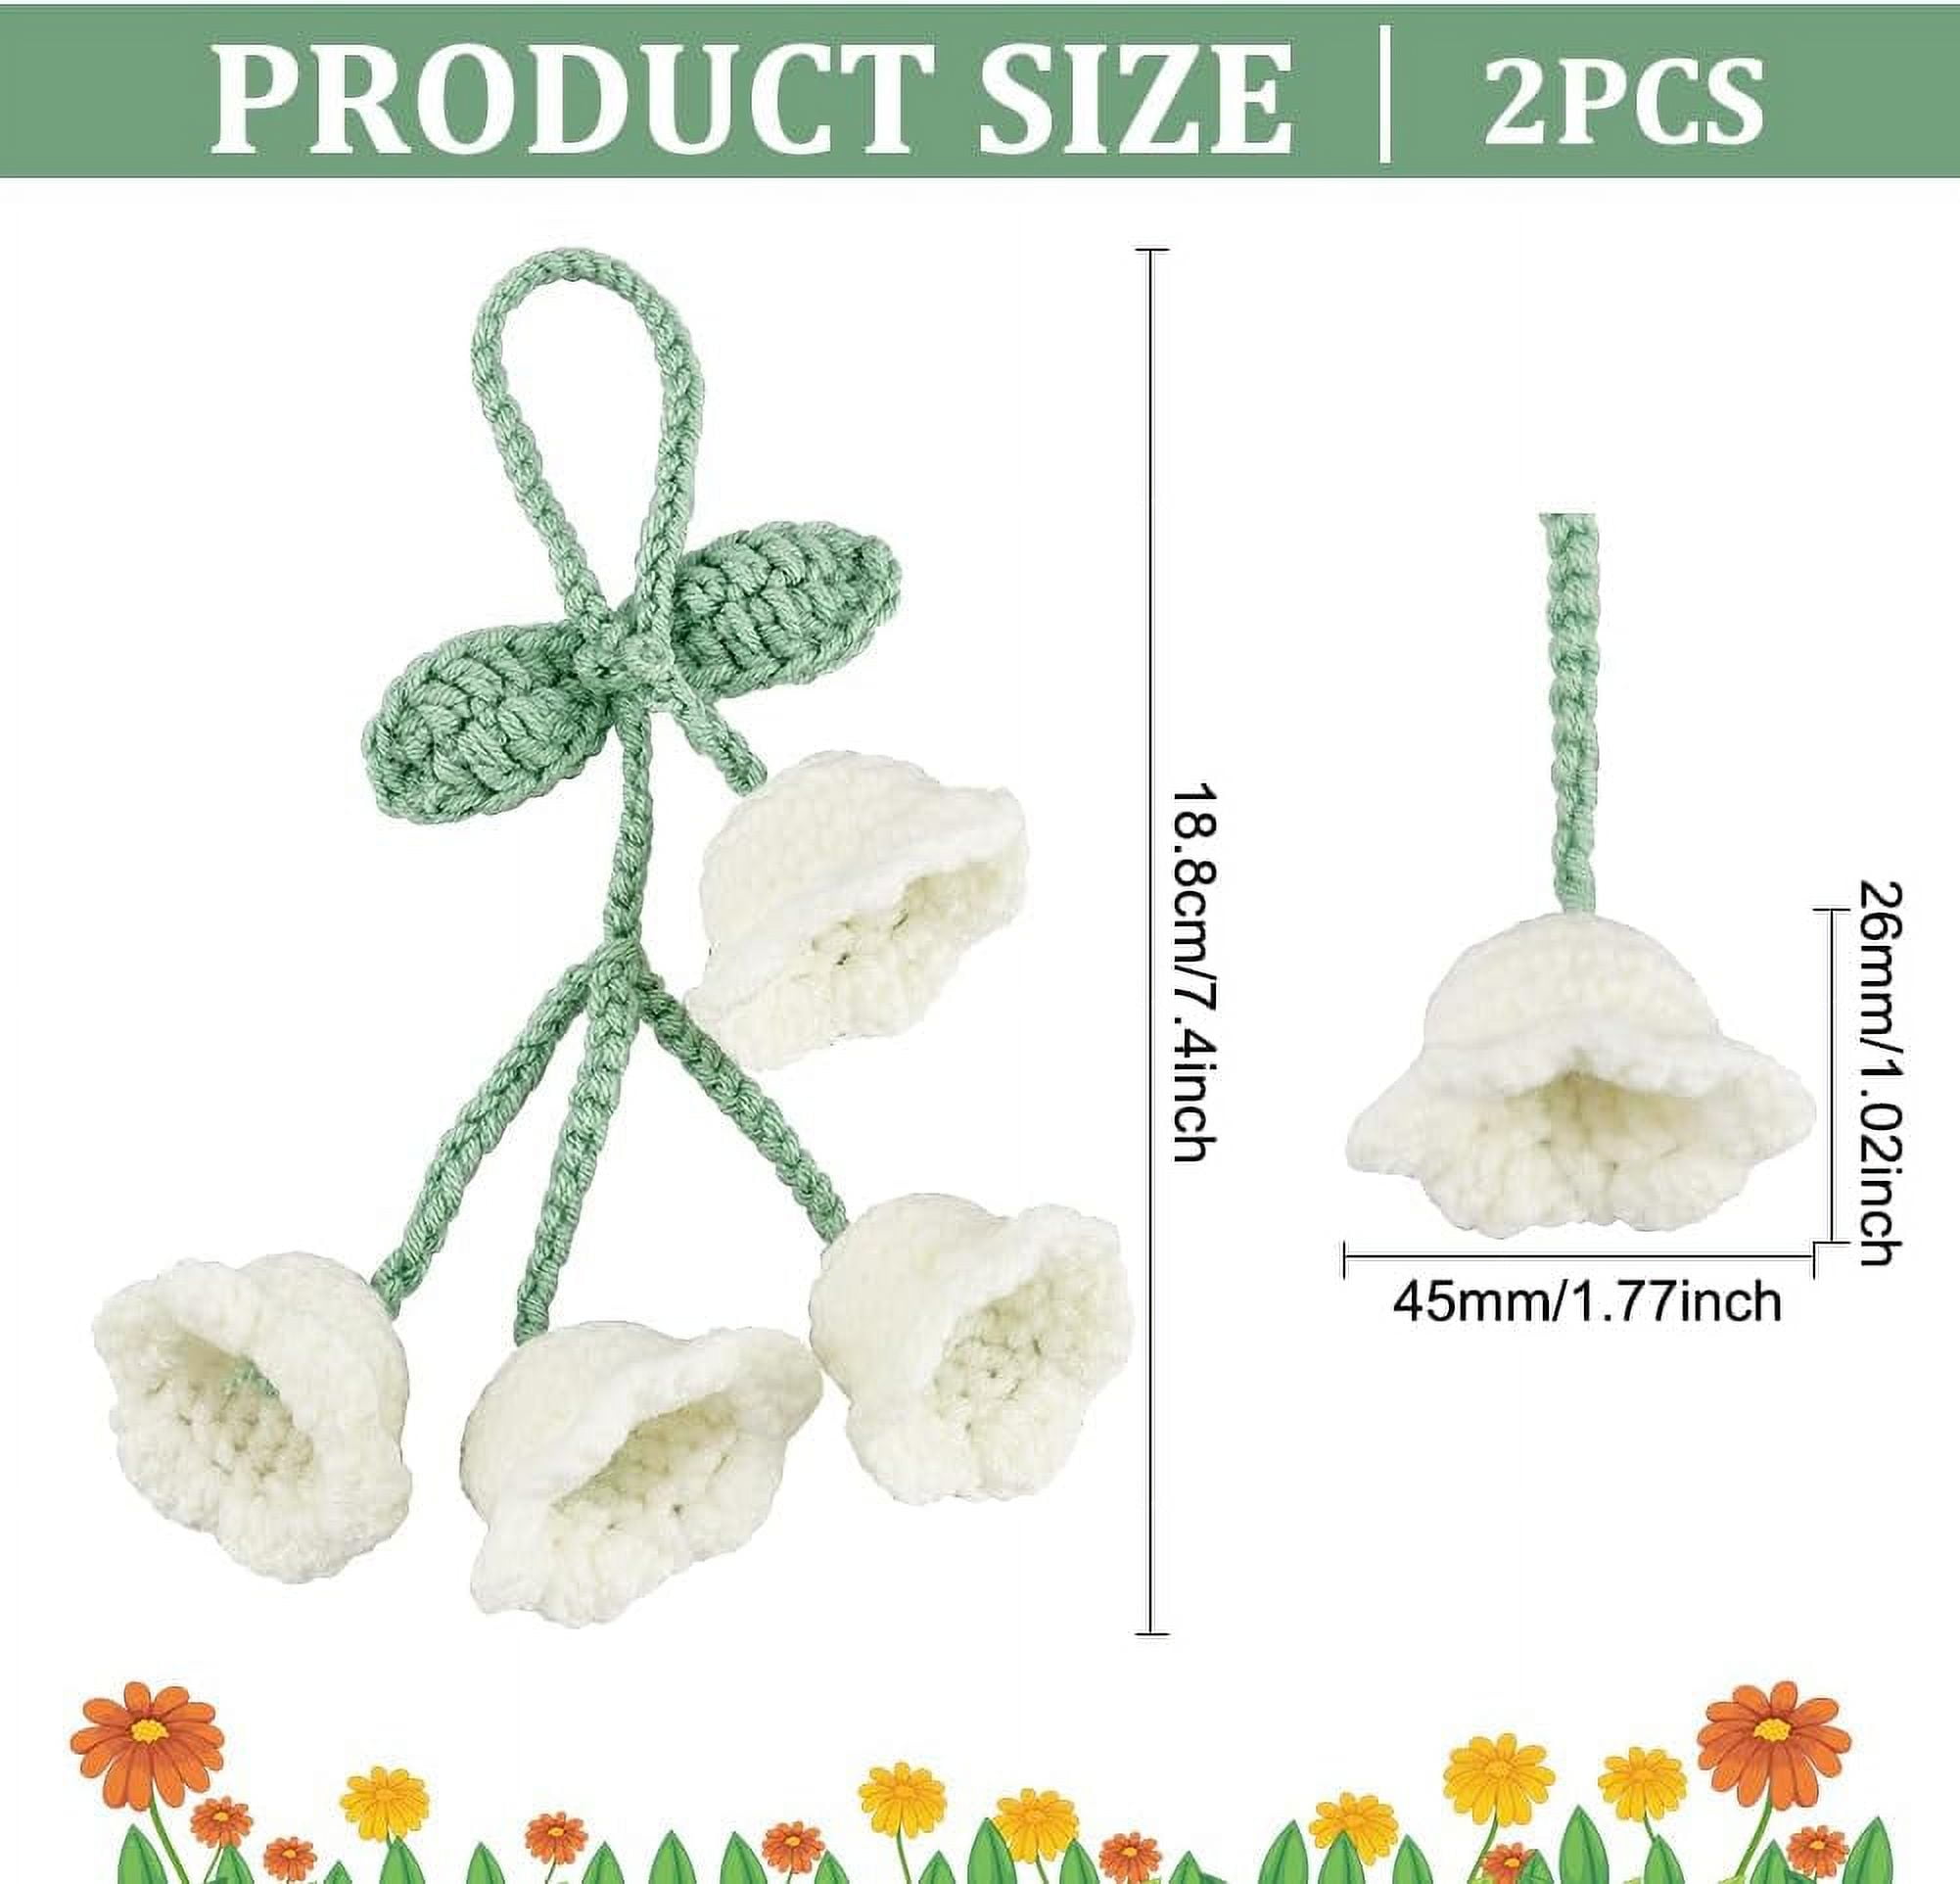 Blingcute  Crochet Lily of the valley Car Mirror Hanging Decor